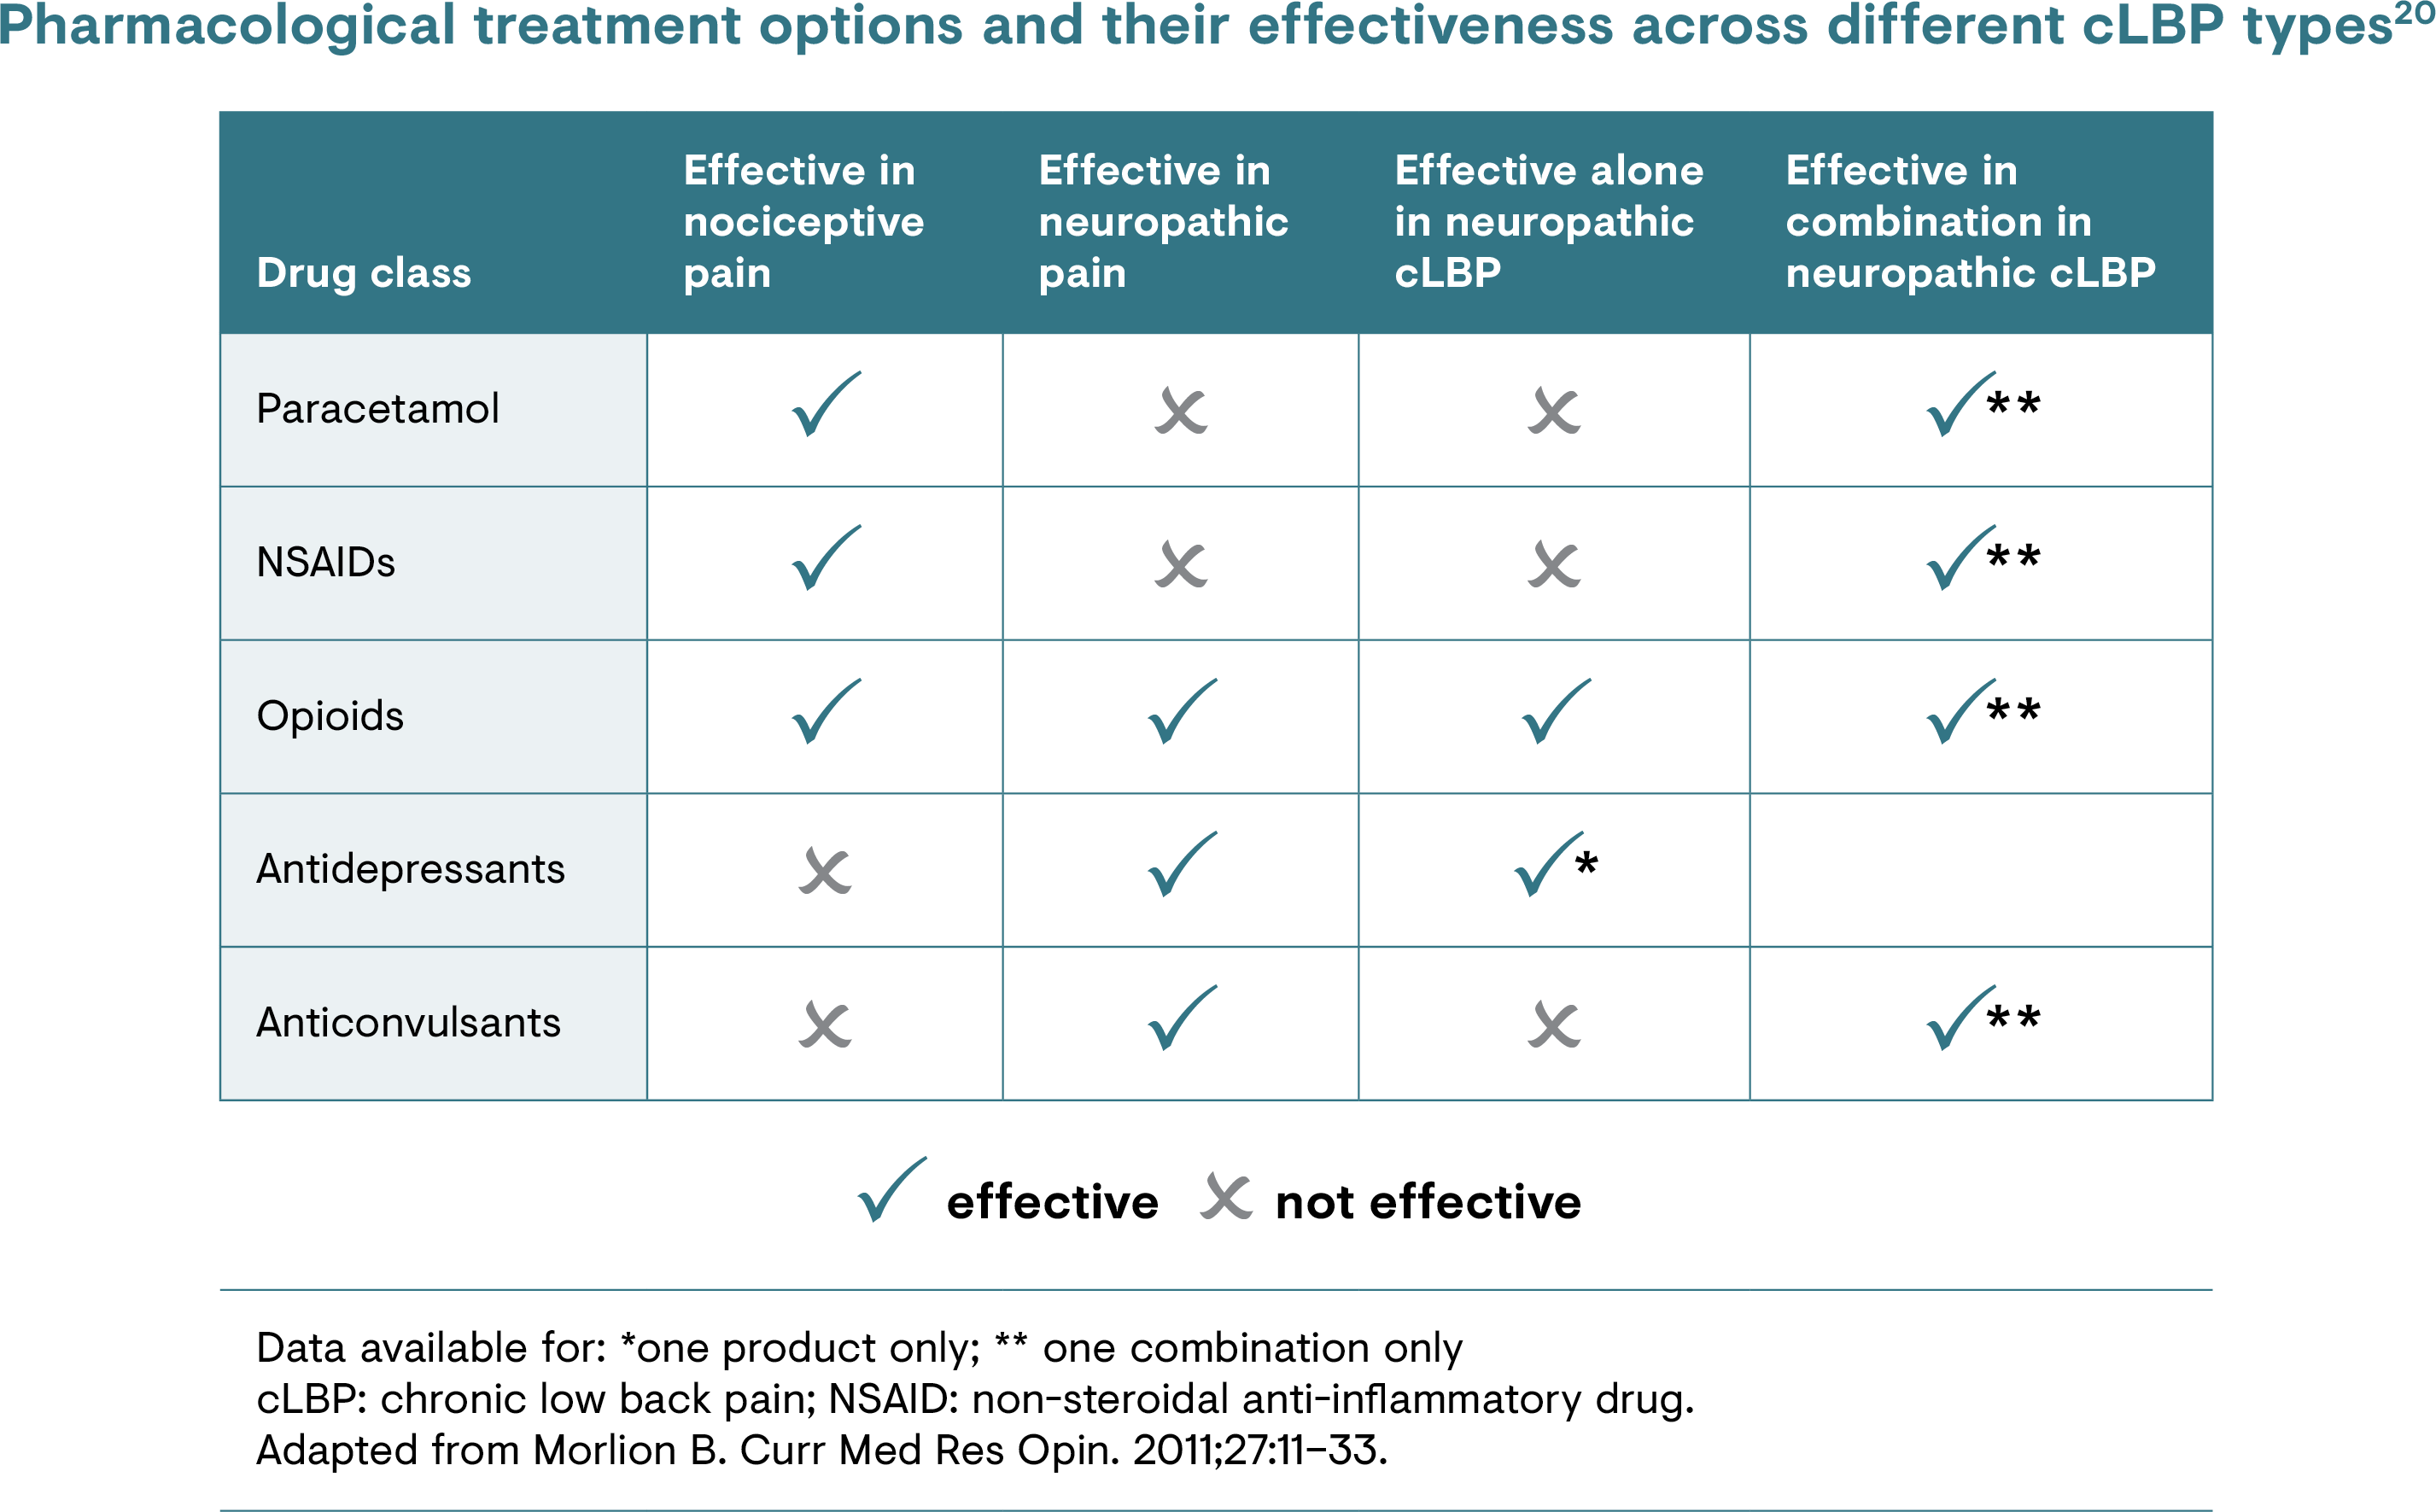 Table showing various pharmacological treatment options and their effectiveness for chronic low back pain (cLBP)